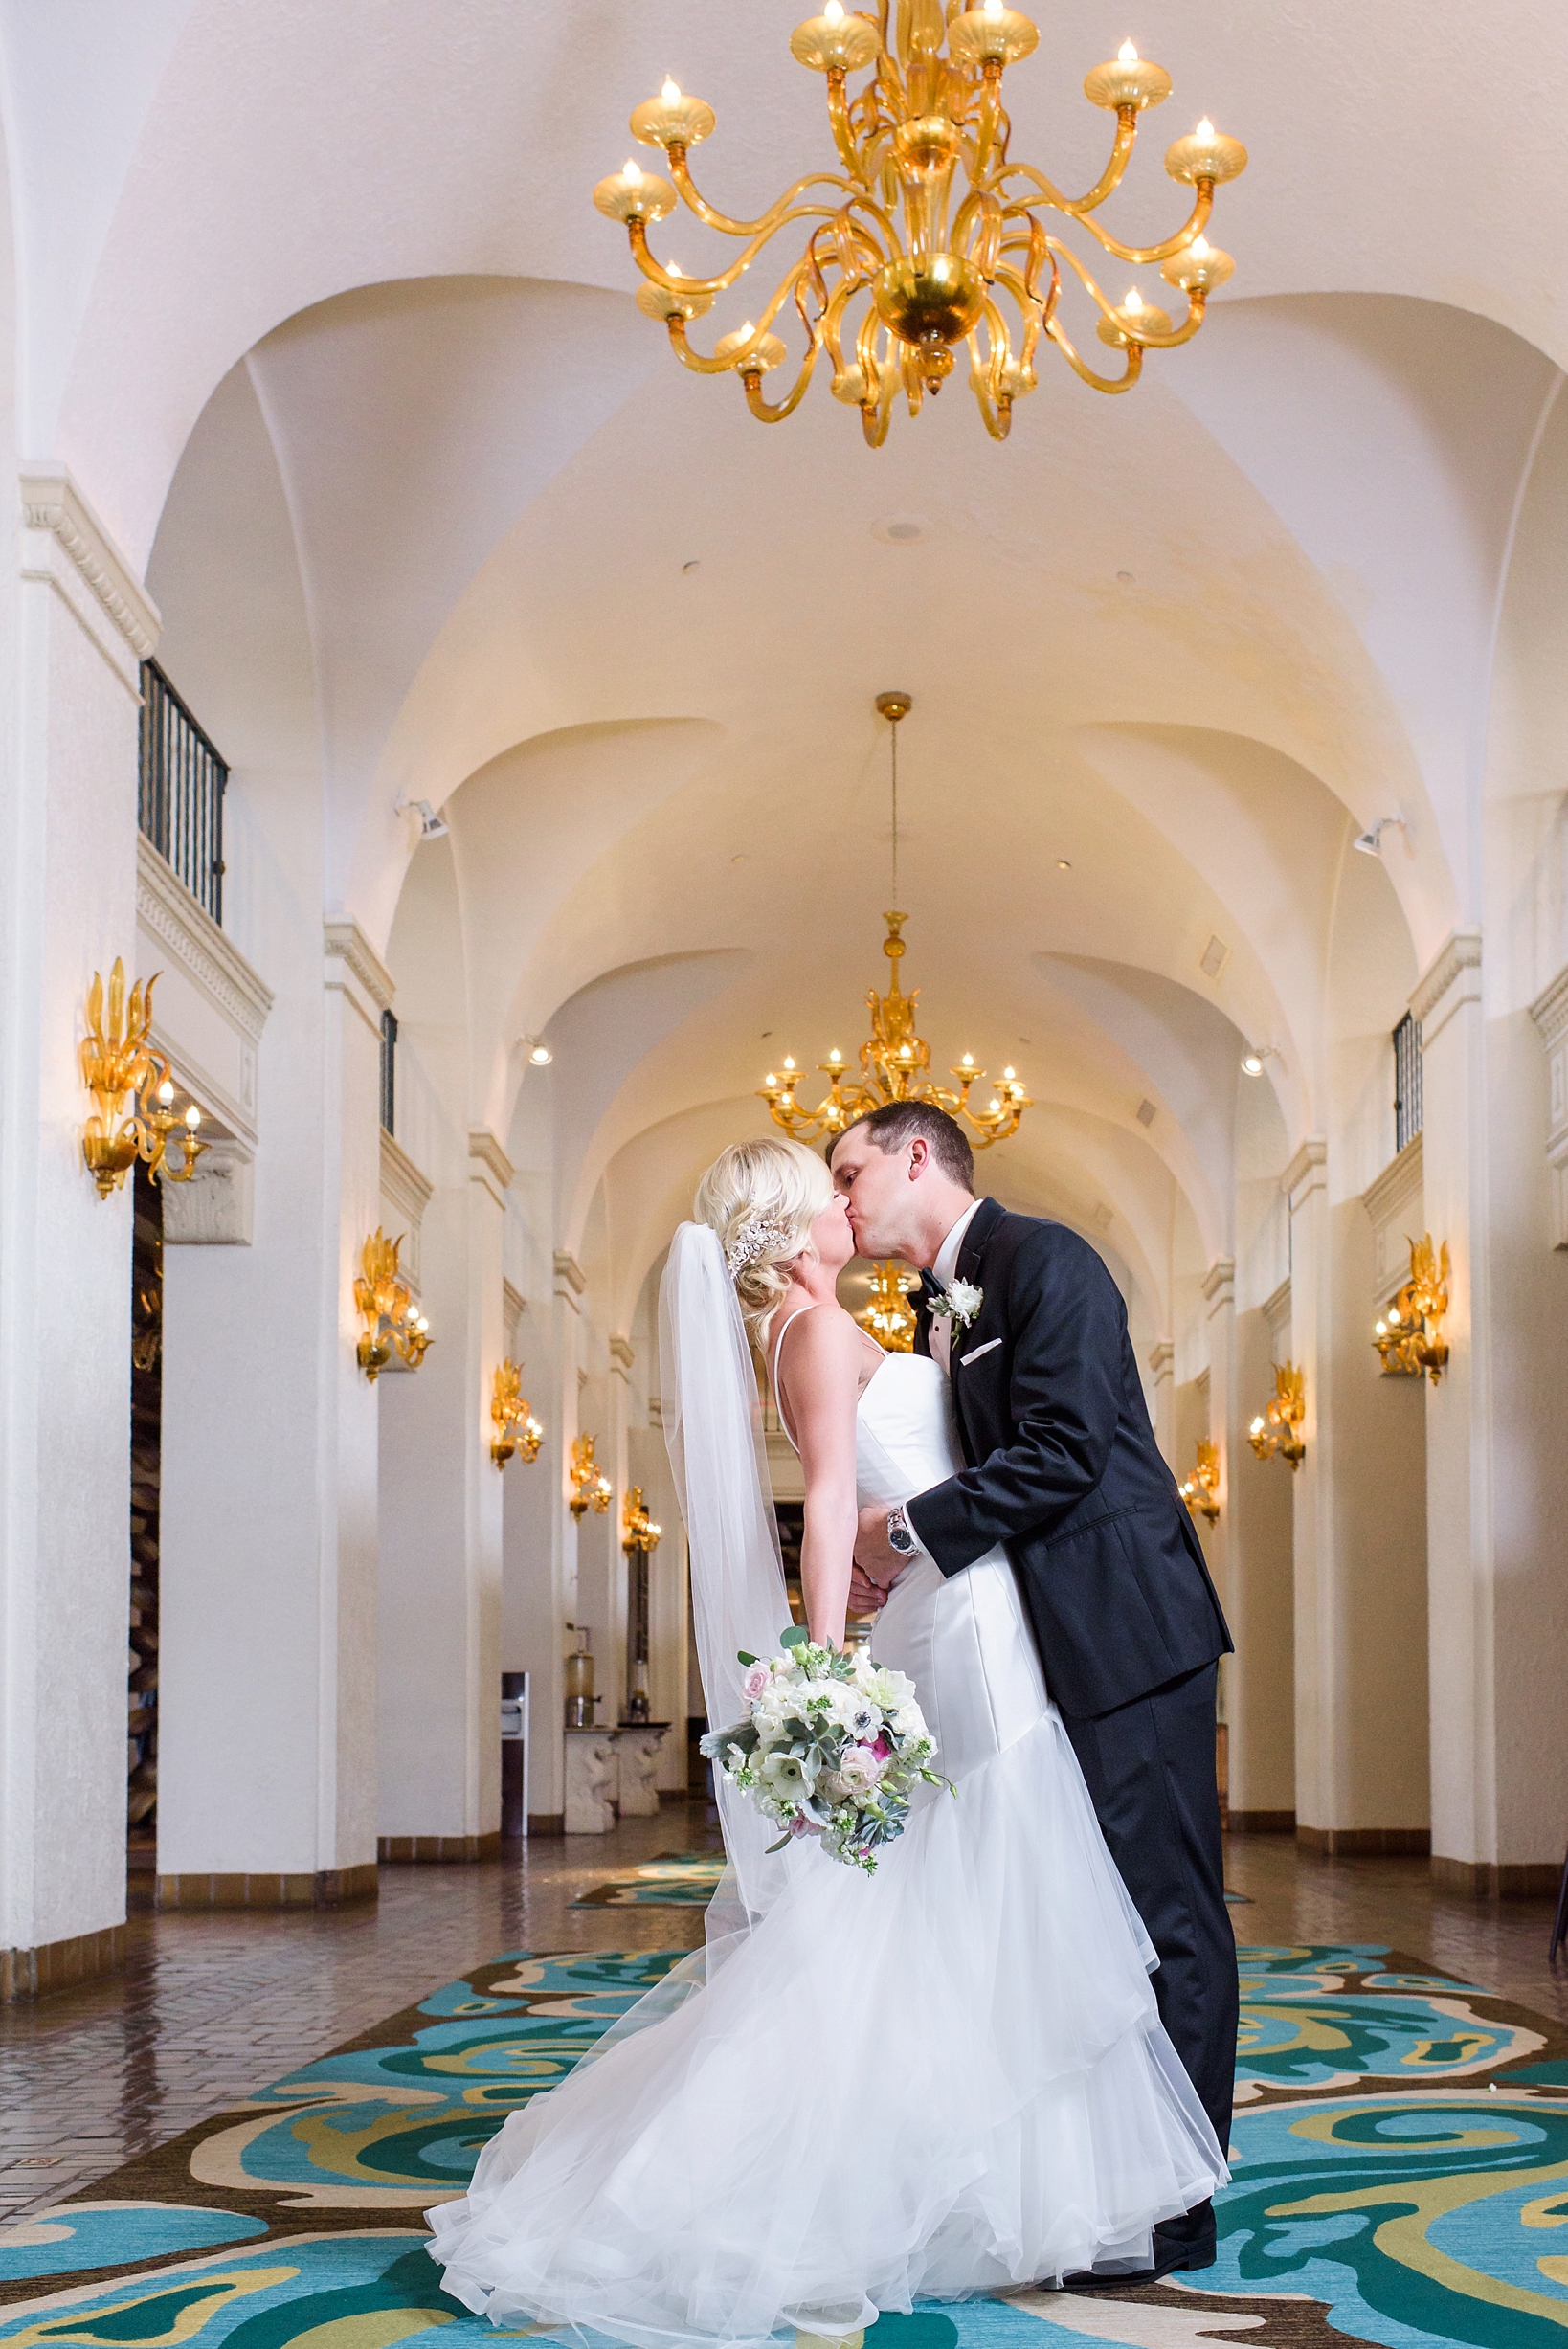 Bride and Groom share a kiss under the chandeliers by Sarah & Ben Photography